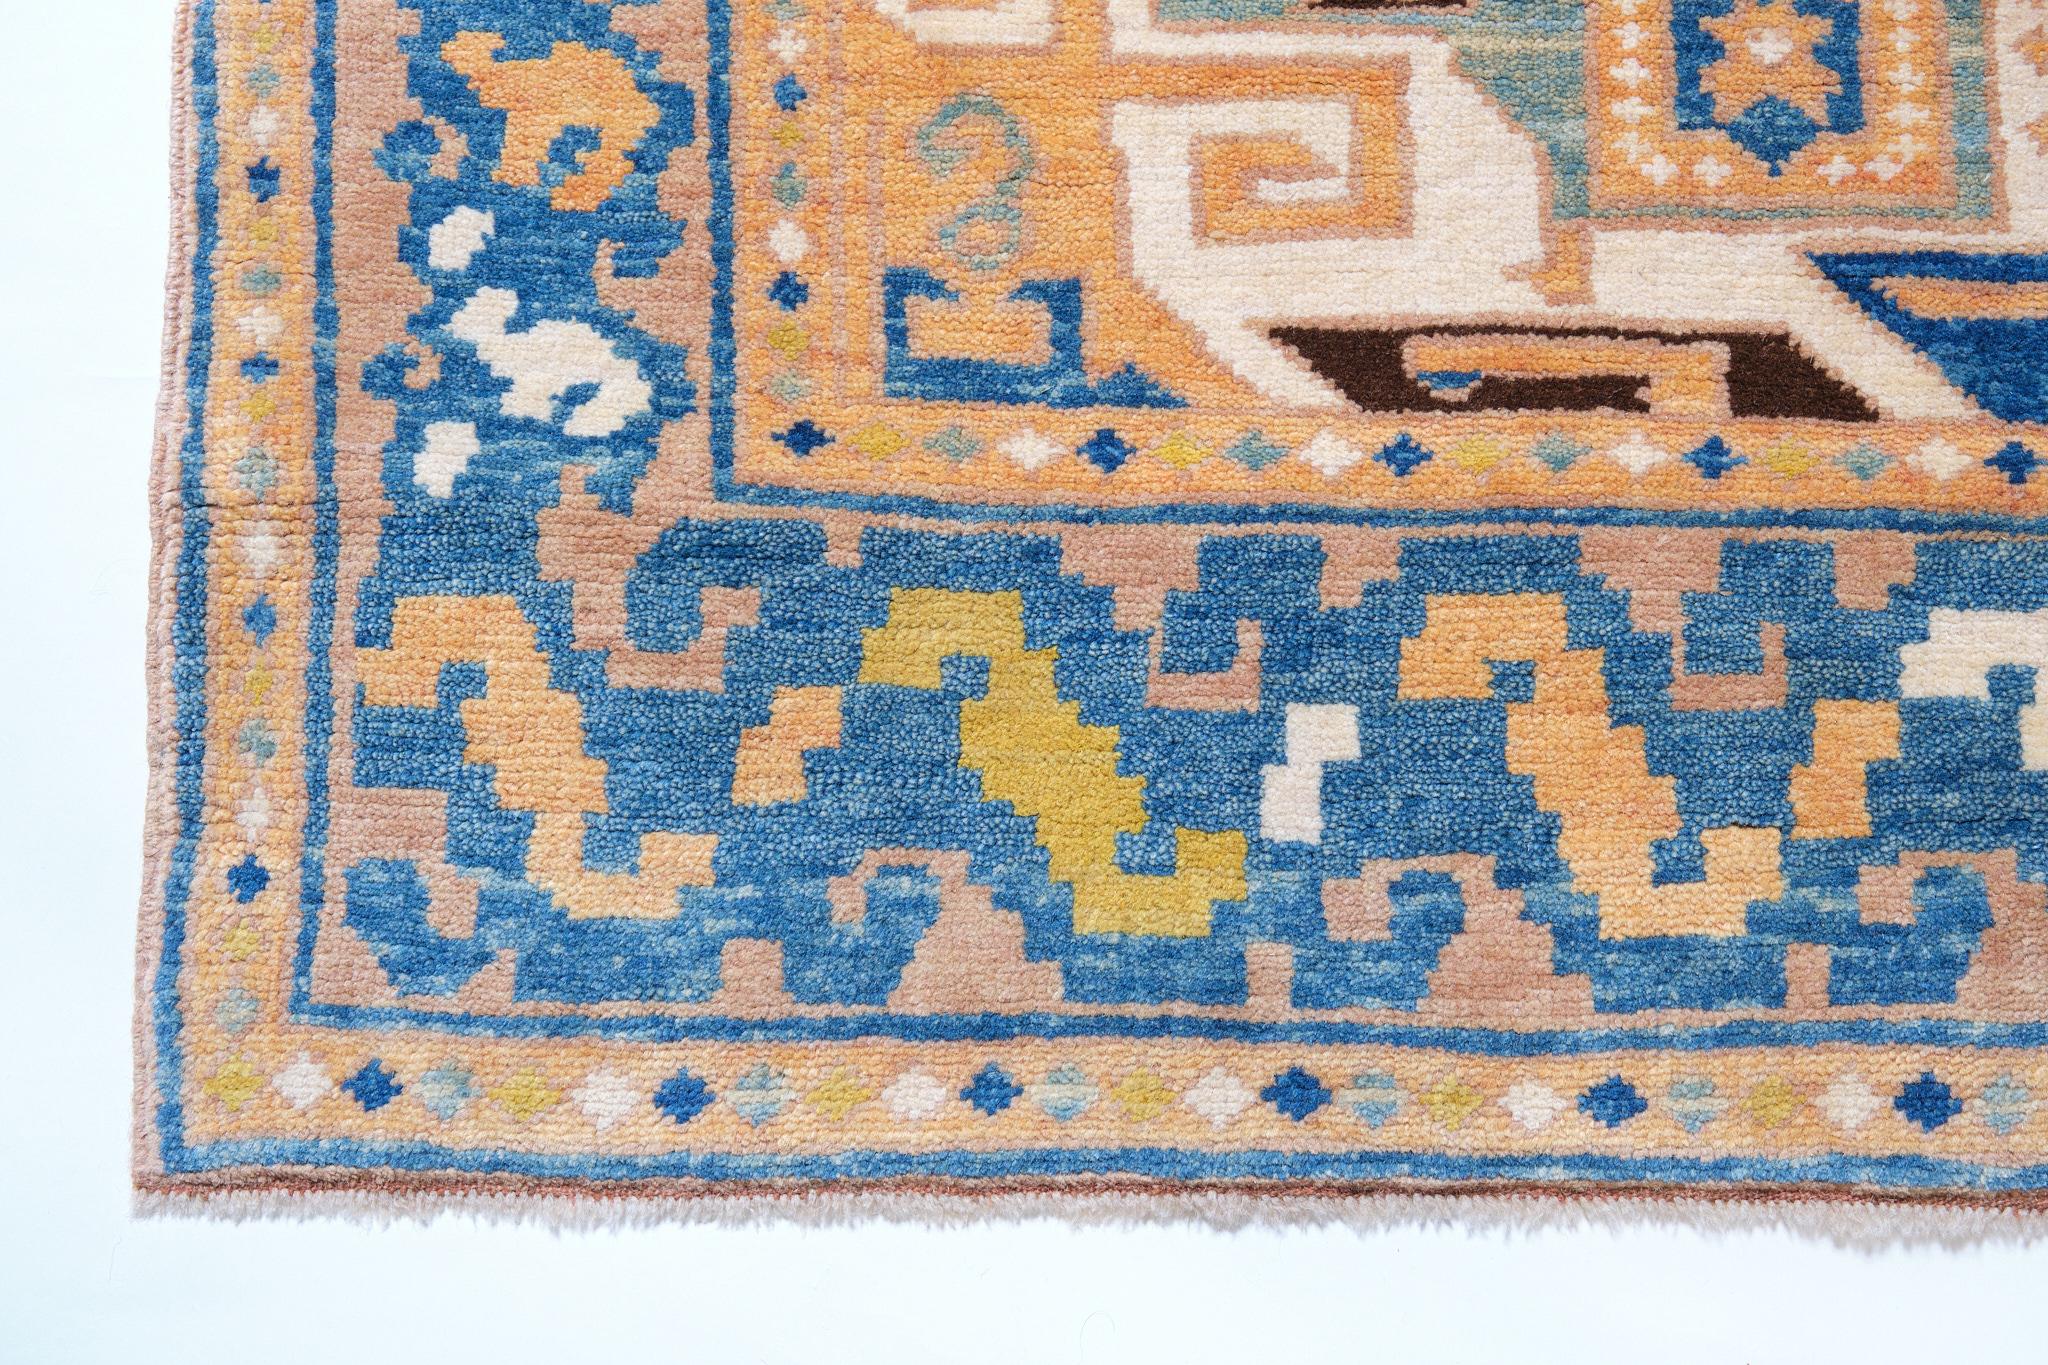 The source of the rug comes from the book Orient Star – A Carpet Collection, E. Heinrich Kirchheim, Hali Publications Ltd, 1993 nr.2. This is the best-known example of a Star Kazaks rug from the Mid 19th century from the Central Caucasus area. Star